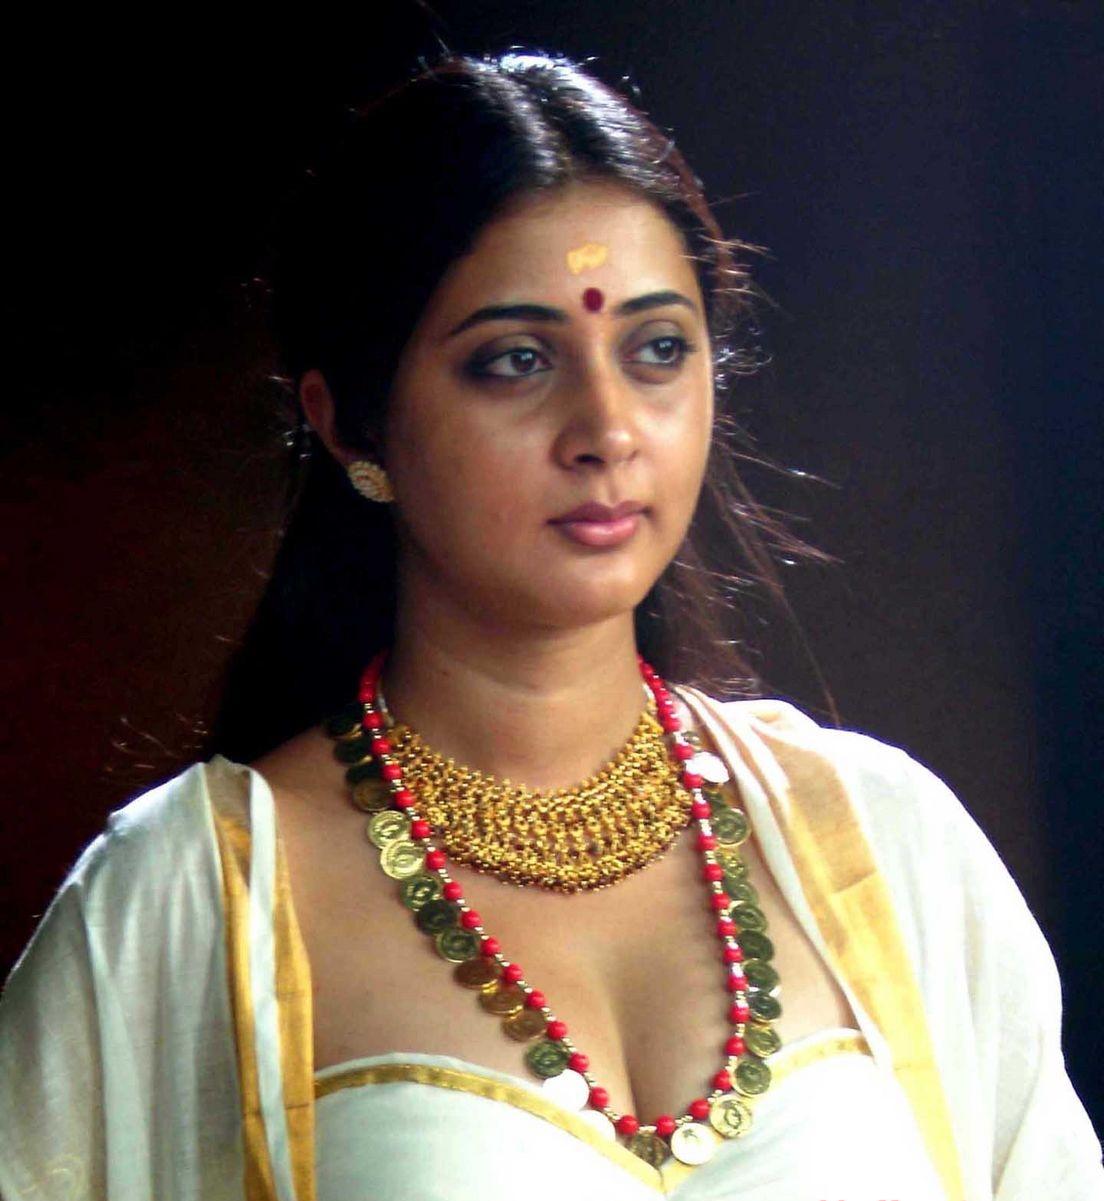 Her second film in Malayalam was Pazhassi Rajaas the heroine of Mammootty. 